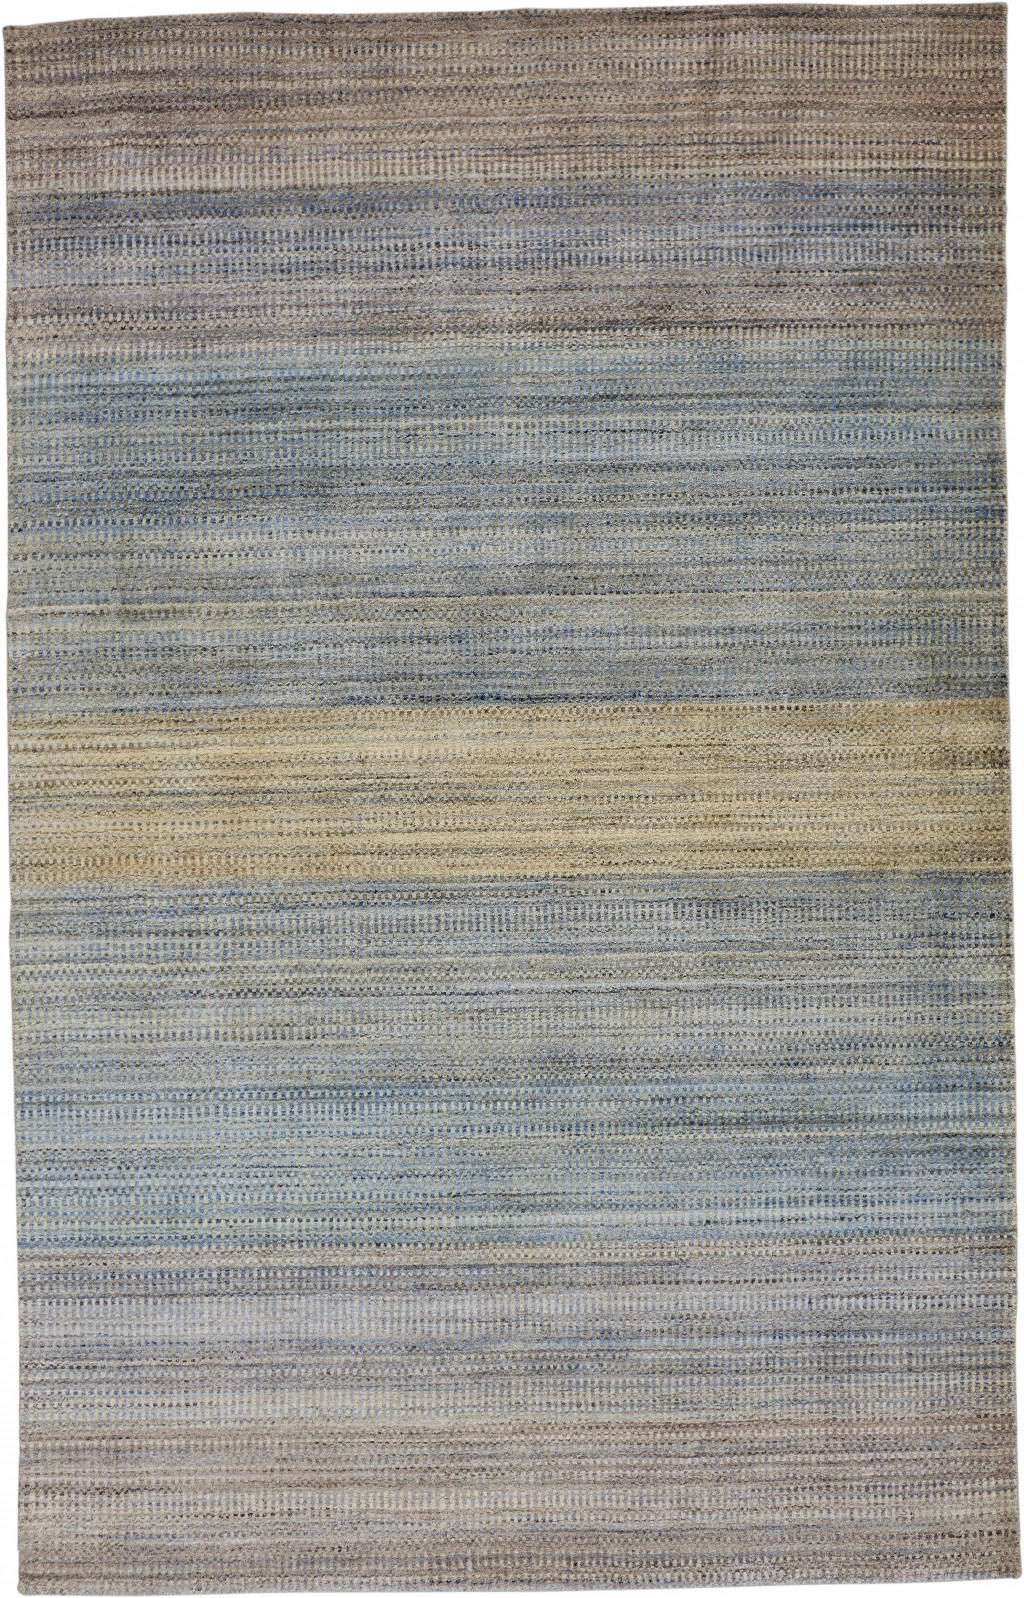 5' X 8' Blue Purple And Tan Ombre Hand Woven Area Rug-511744-1